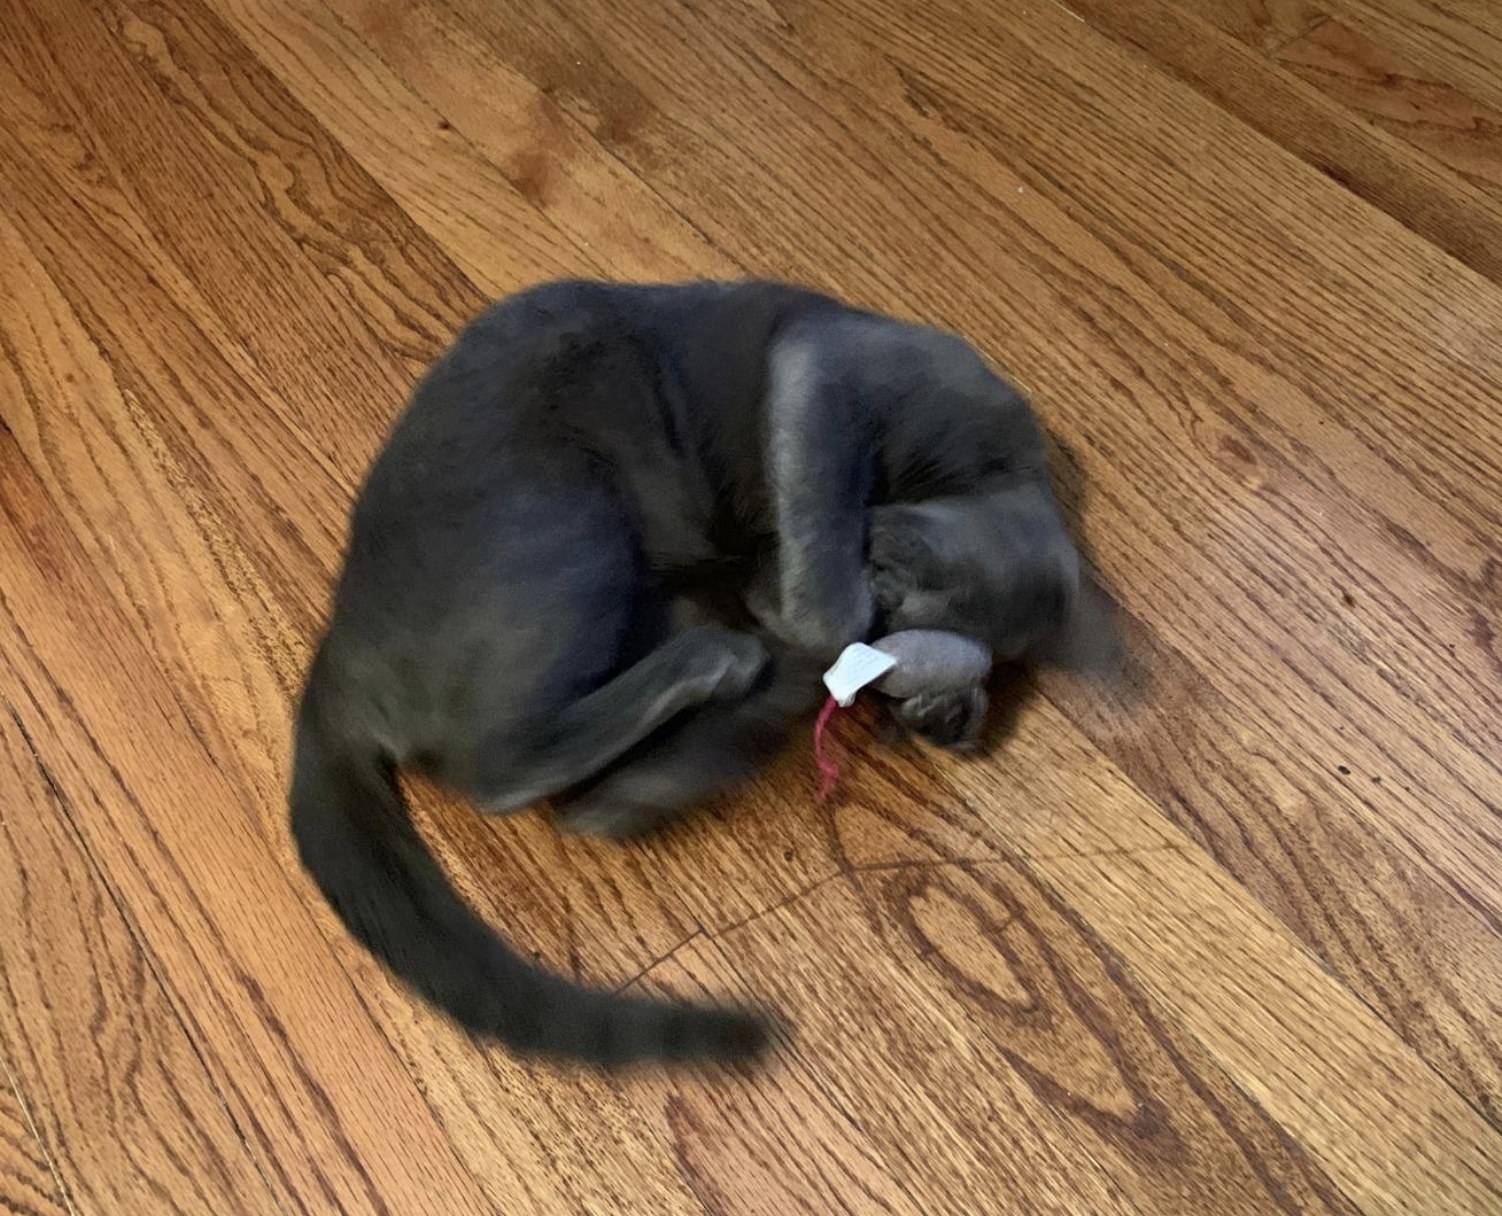 a gret cat playing with a catnip toy on the floor